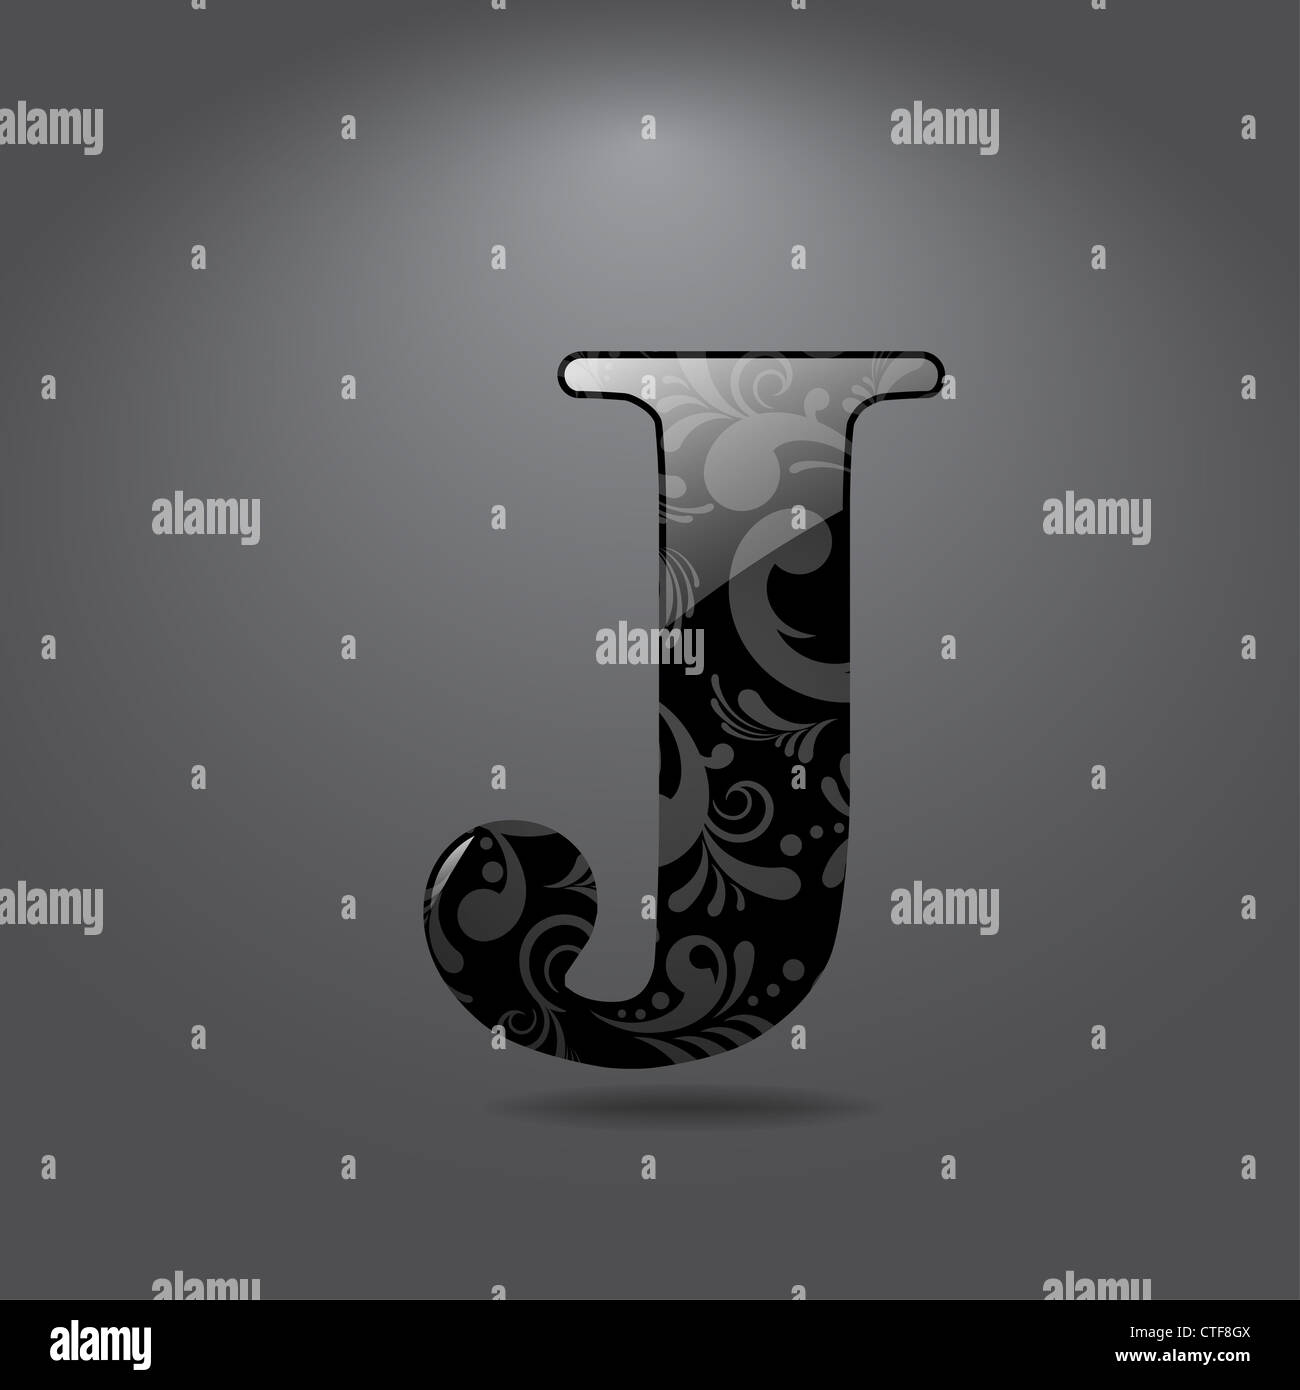 Glossy letter J isolated on gray background Stock Photo